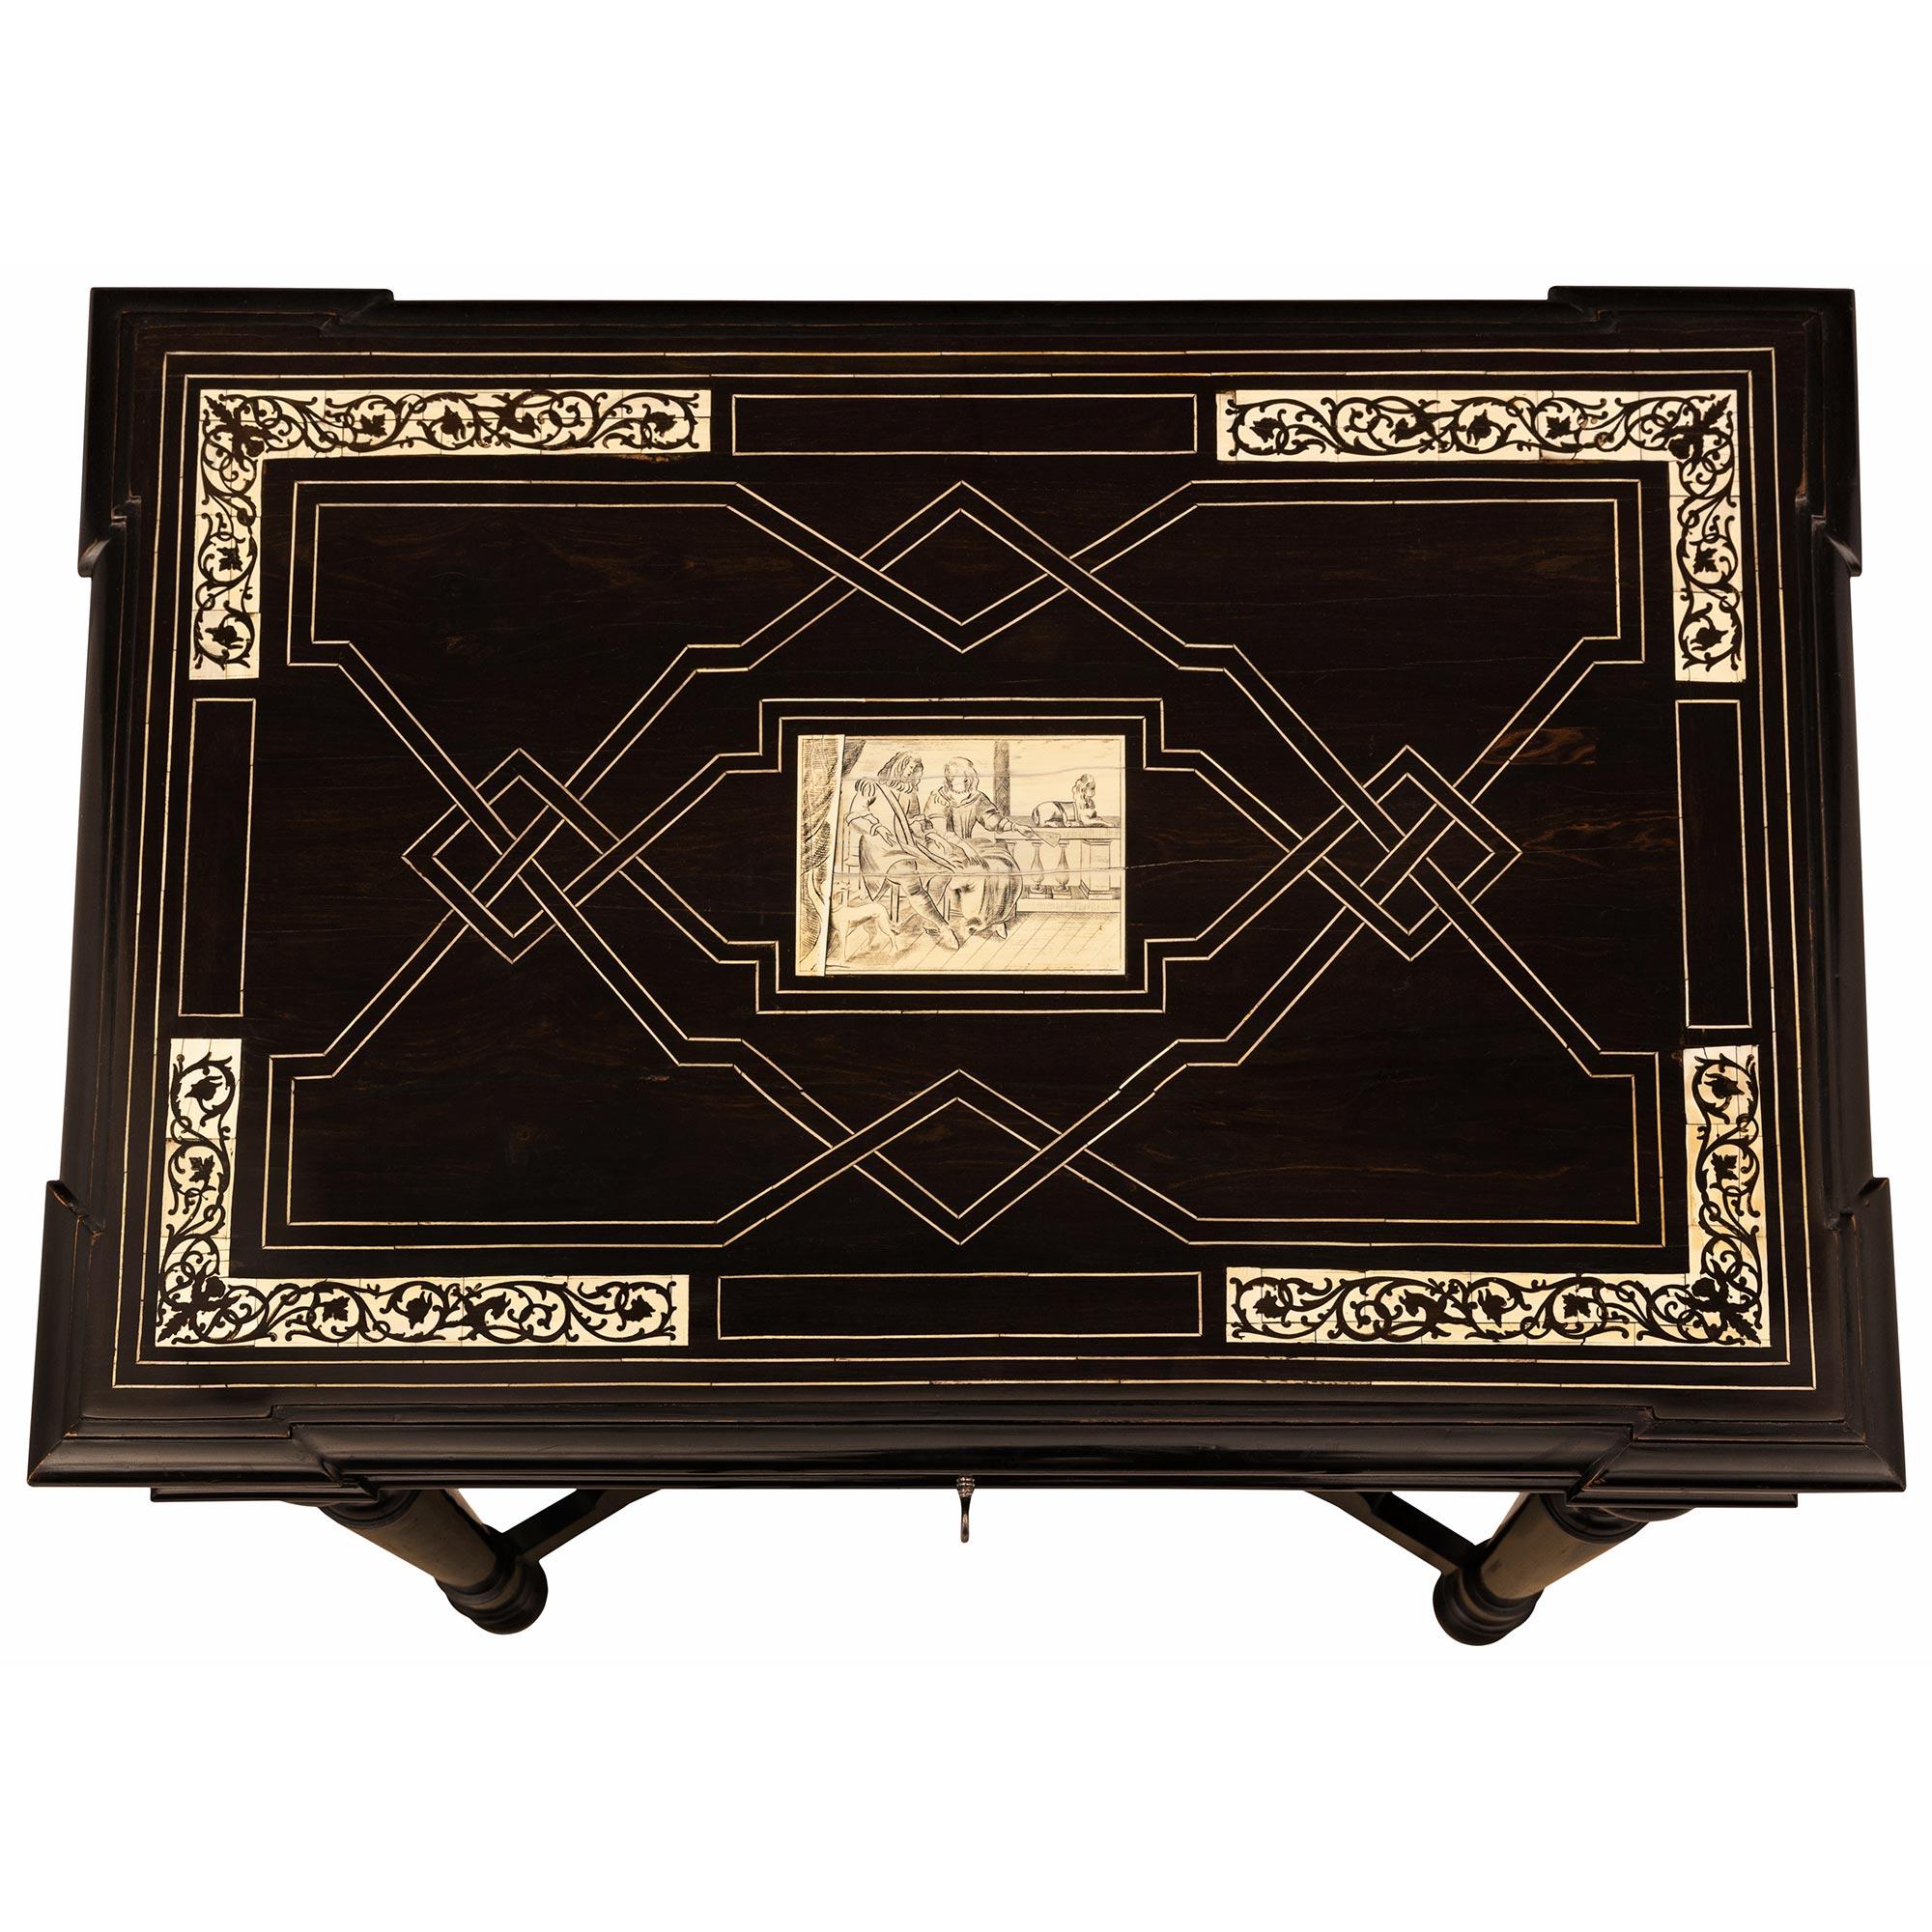 A striking Italian 19th century ebony, ivory, and ormolu center/side table. The one drawer rectangular table is raised by four elegant turned tapered legs with charming topie shaped feet and each connected by a beautiful scalloped shaped stretcher